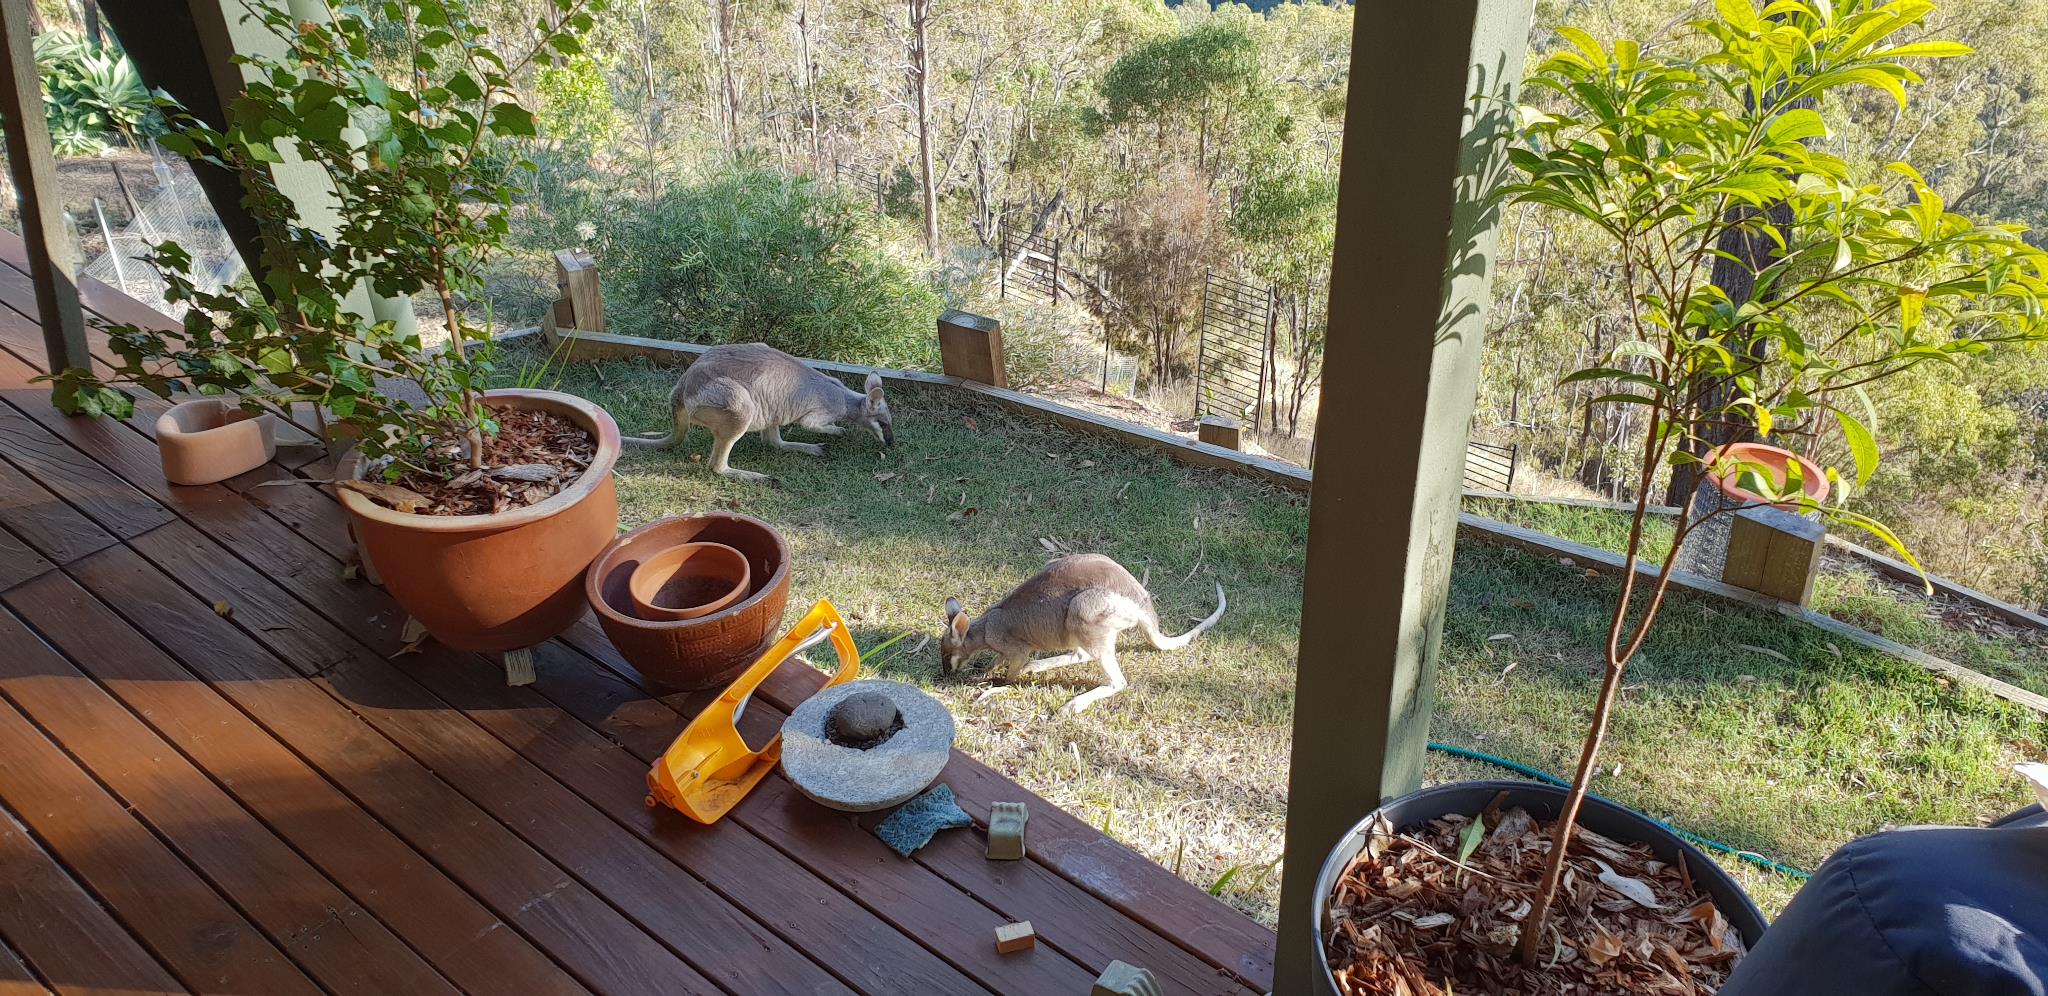 Pretty-faced Wallabies on the Terrace